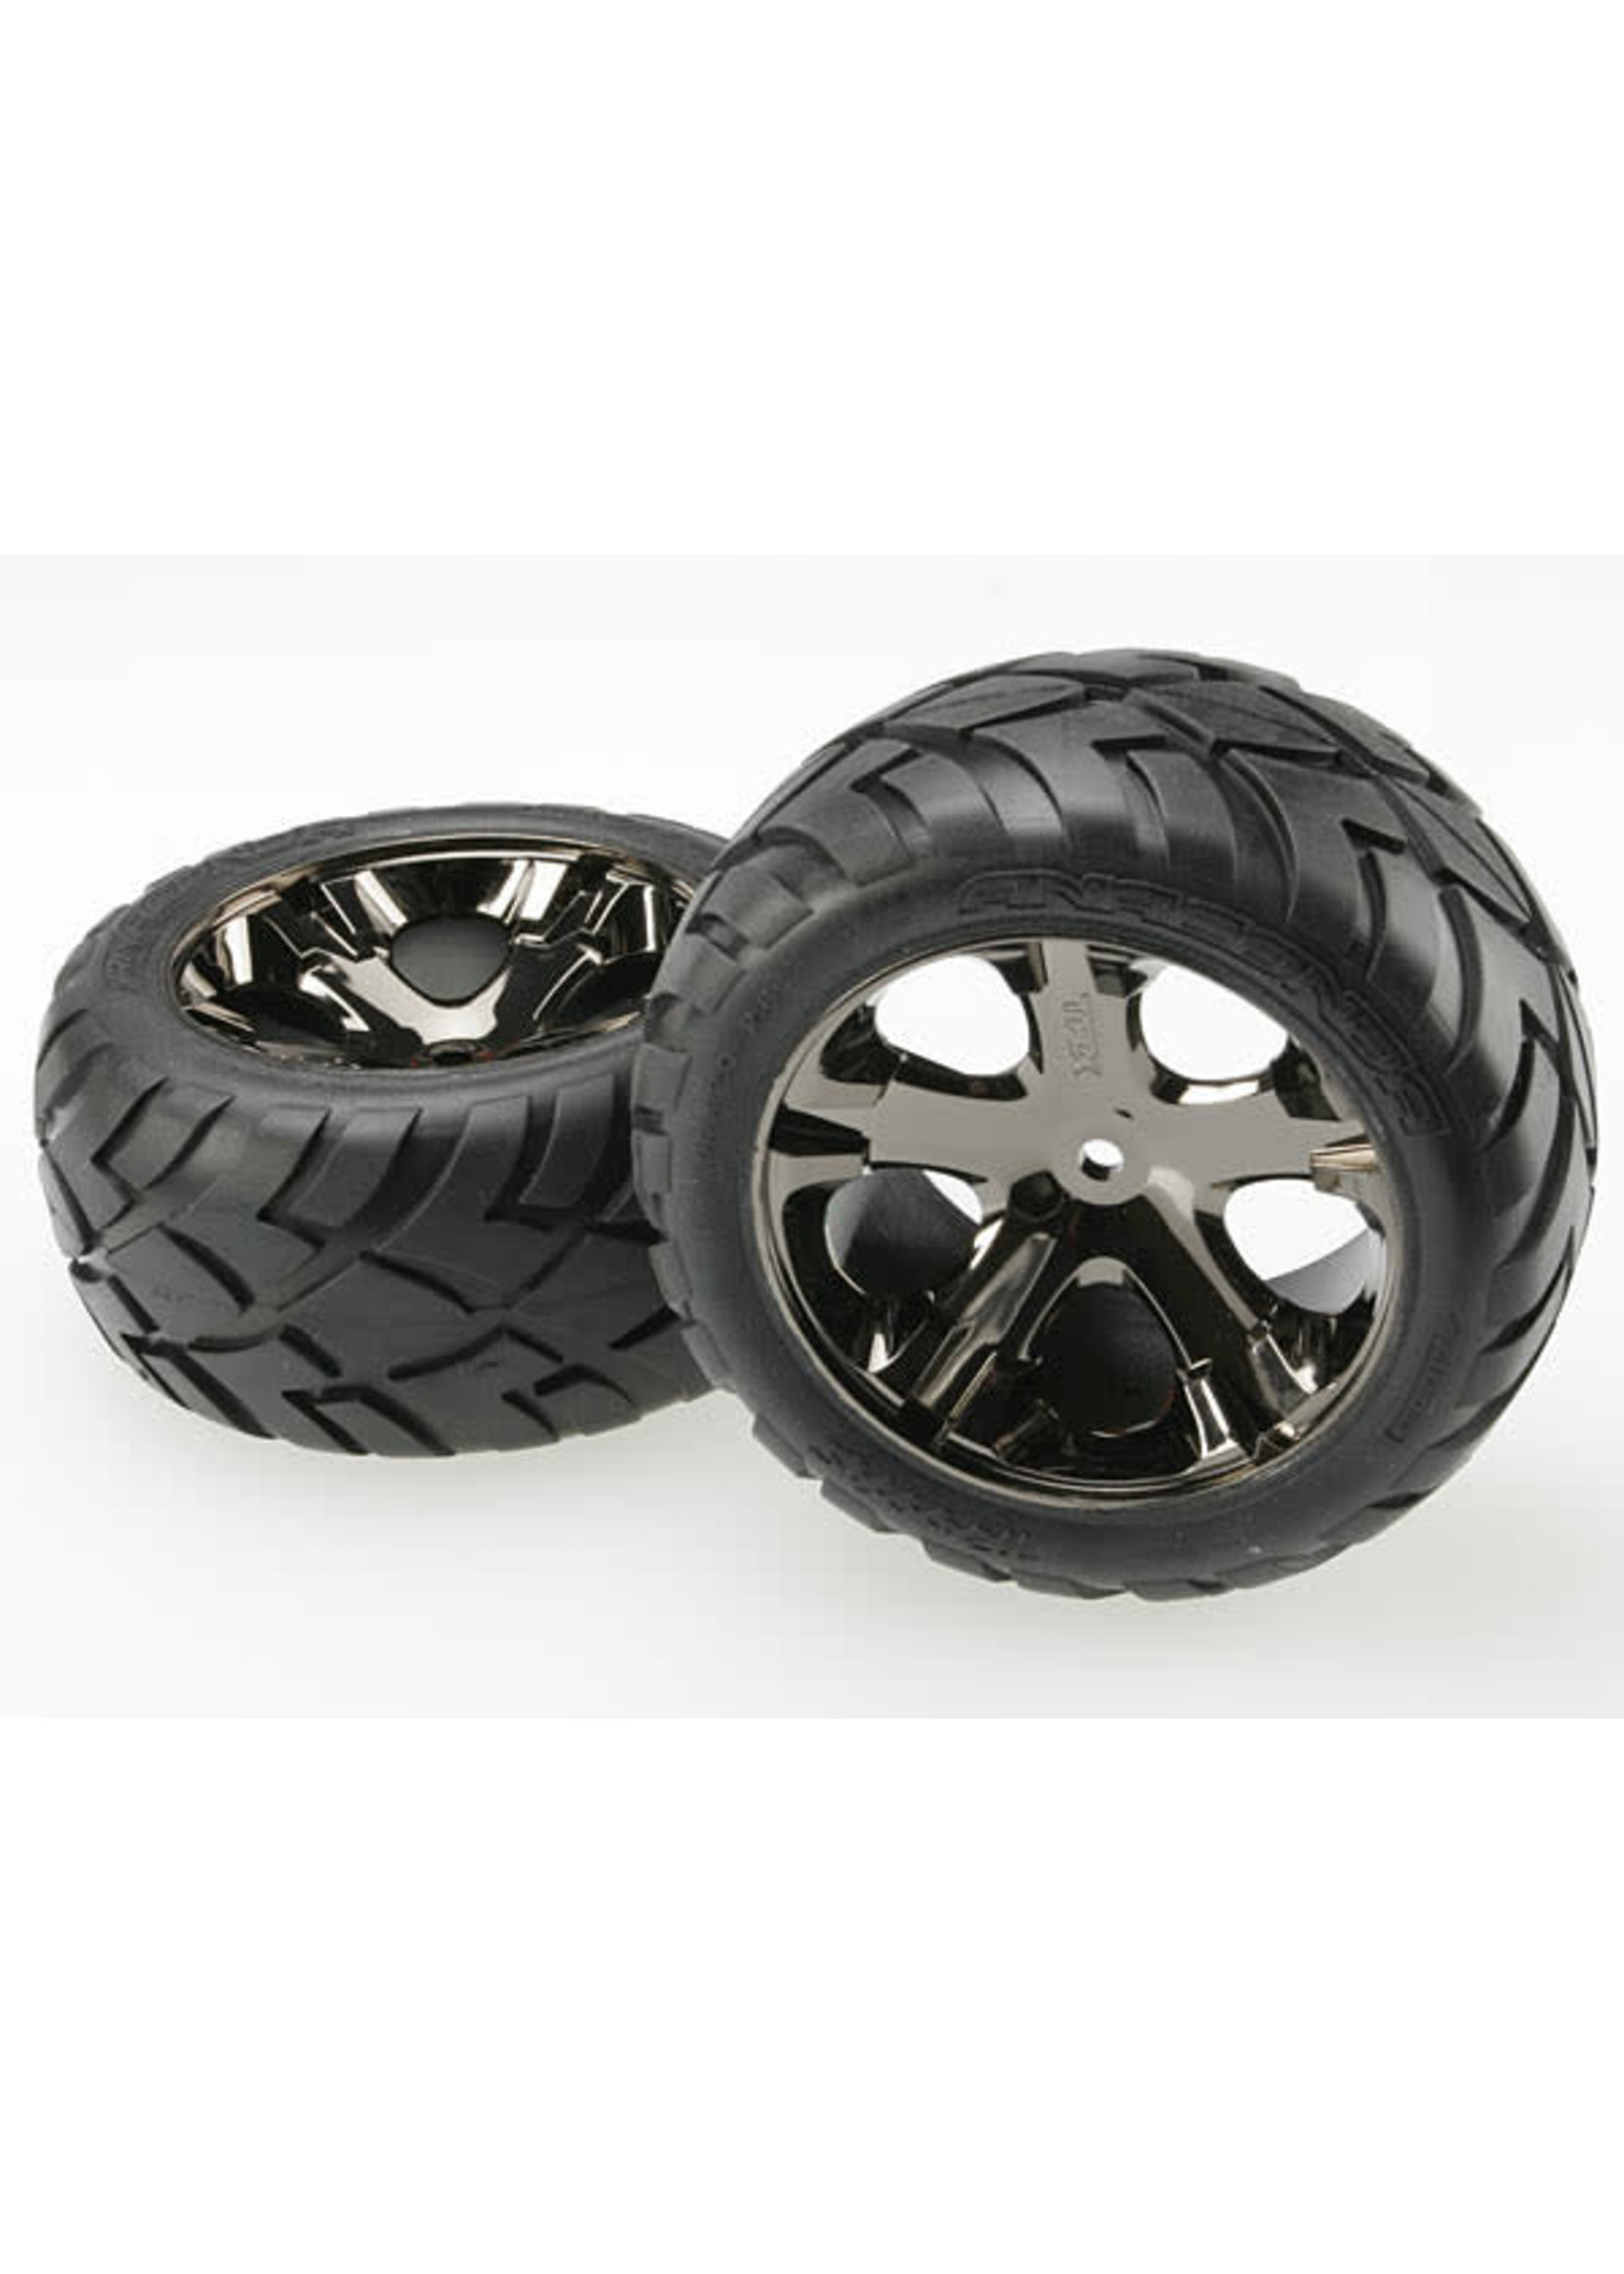 Traxxas TRA3773A Traxxas Tires & wheels, assembled, glued (All Star black chrome wheels, Anaconda tires, foam inserts) (2WD electric rear) (1 left, 1 right)